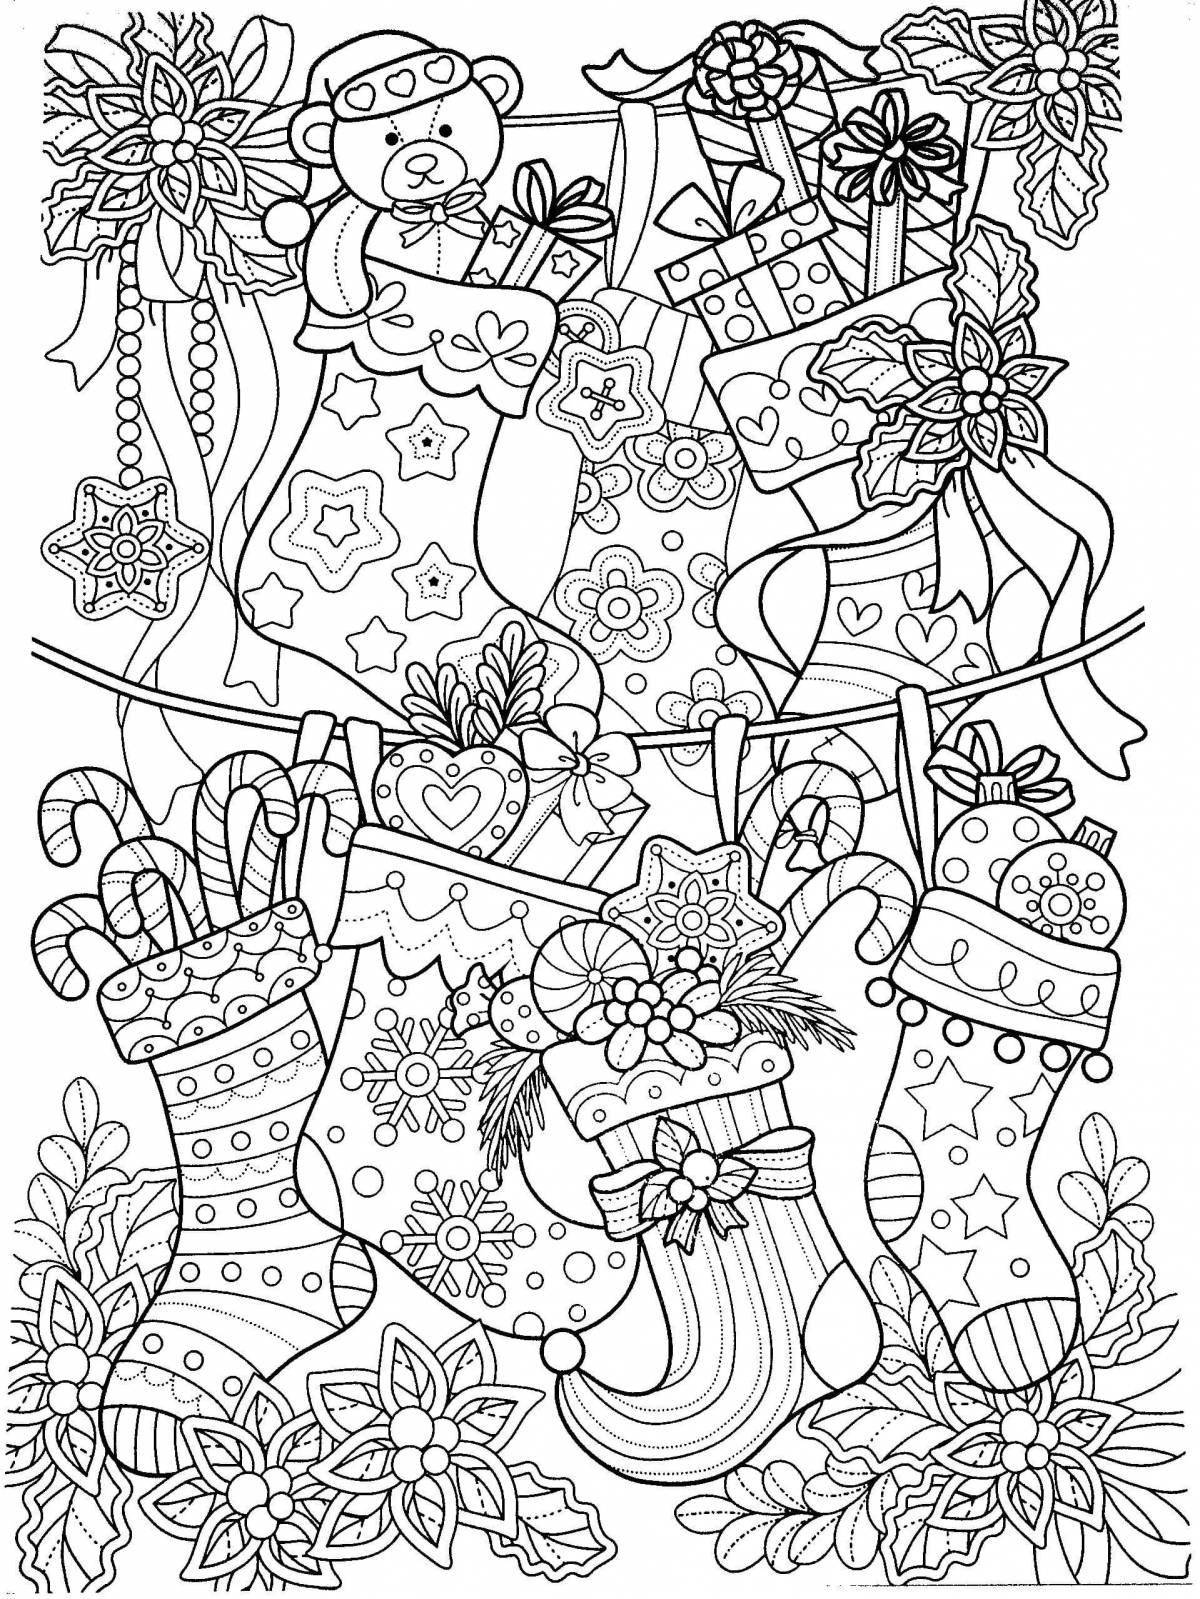 Bright Christmas coloring book for adults